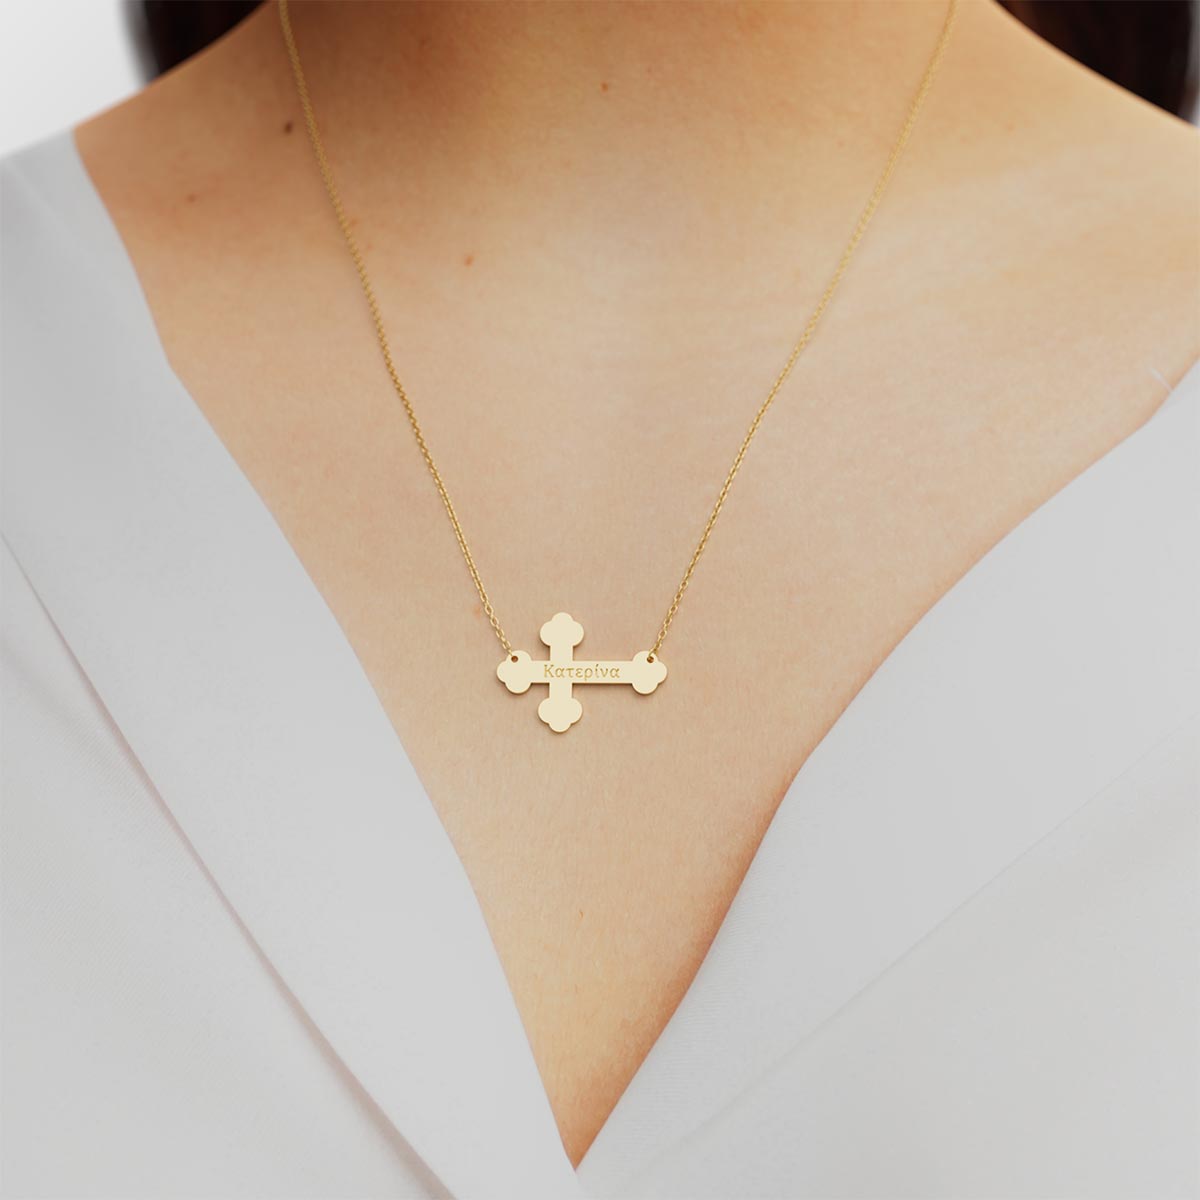 Sideways Cross Necklace With Greek Engraving